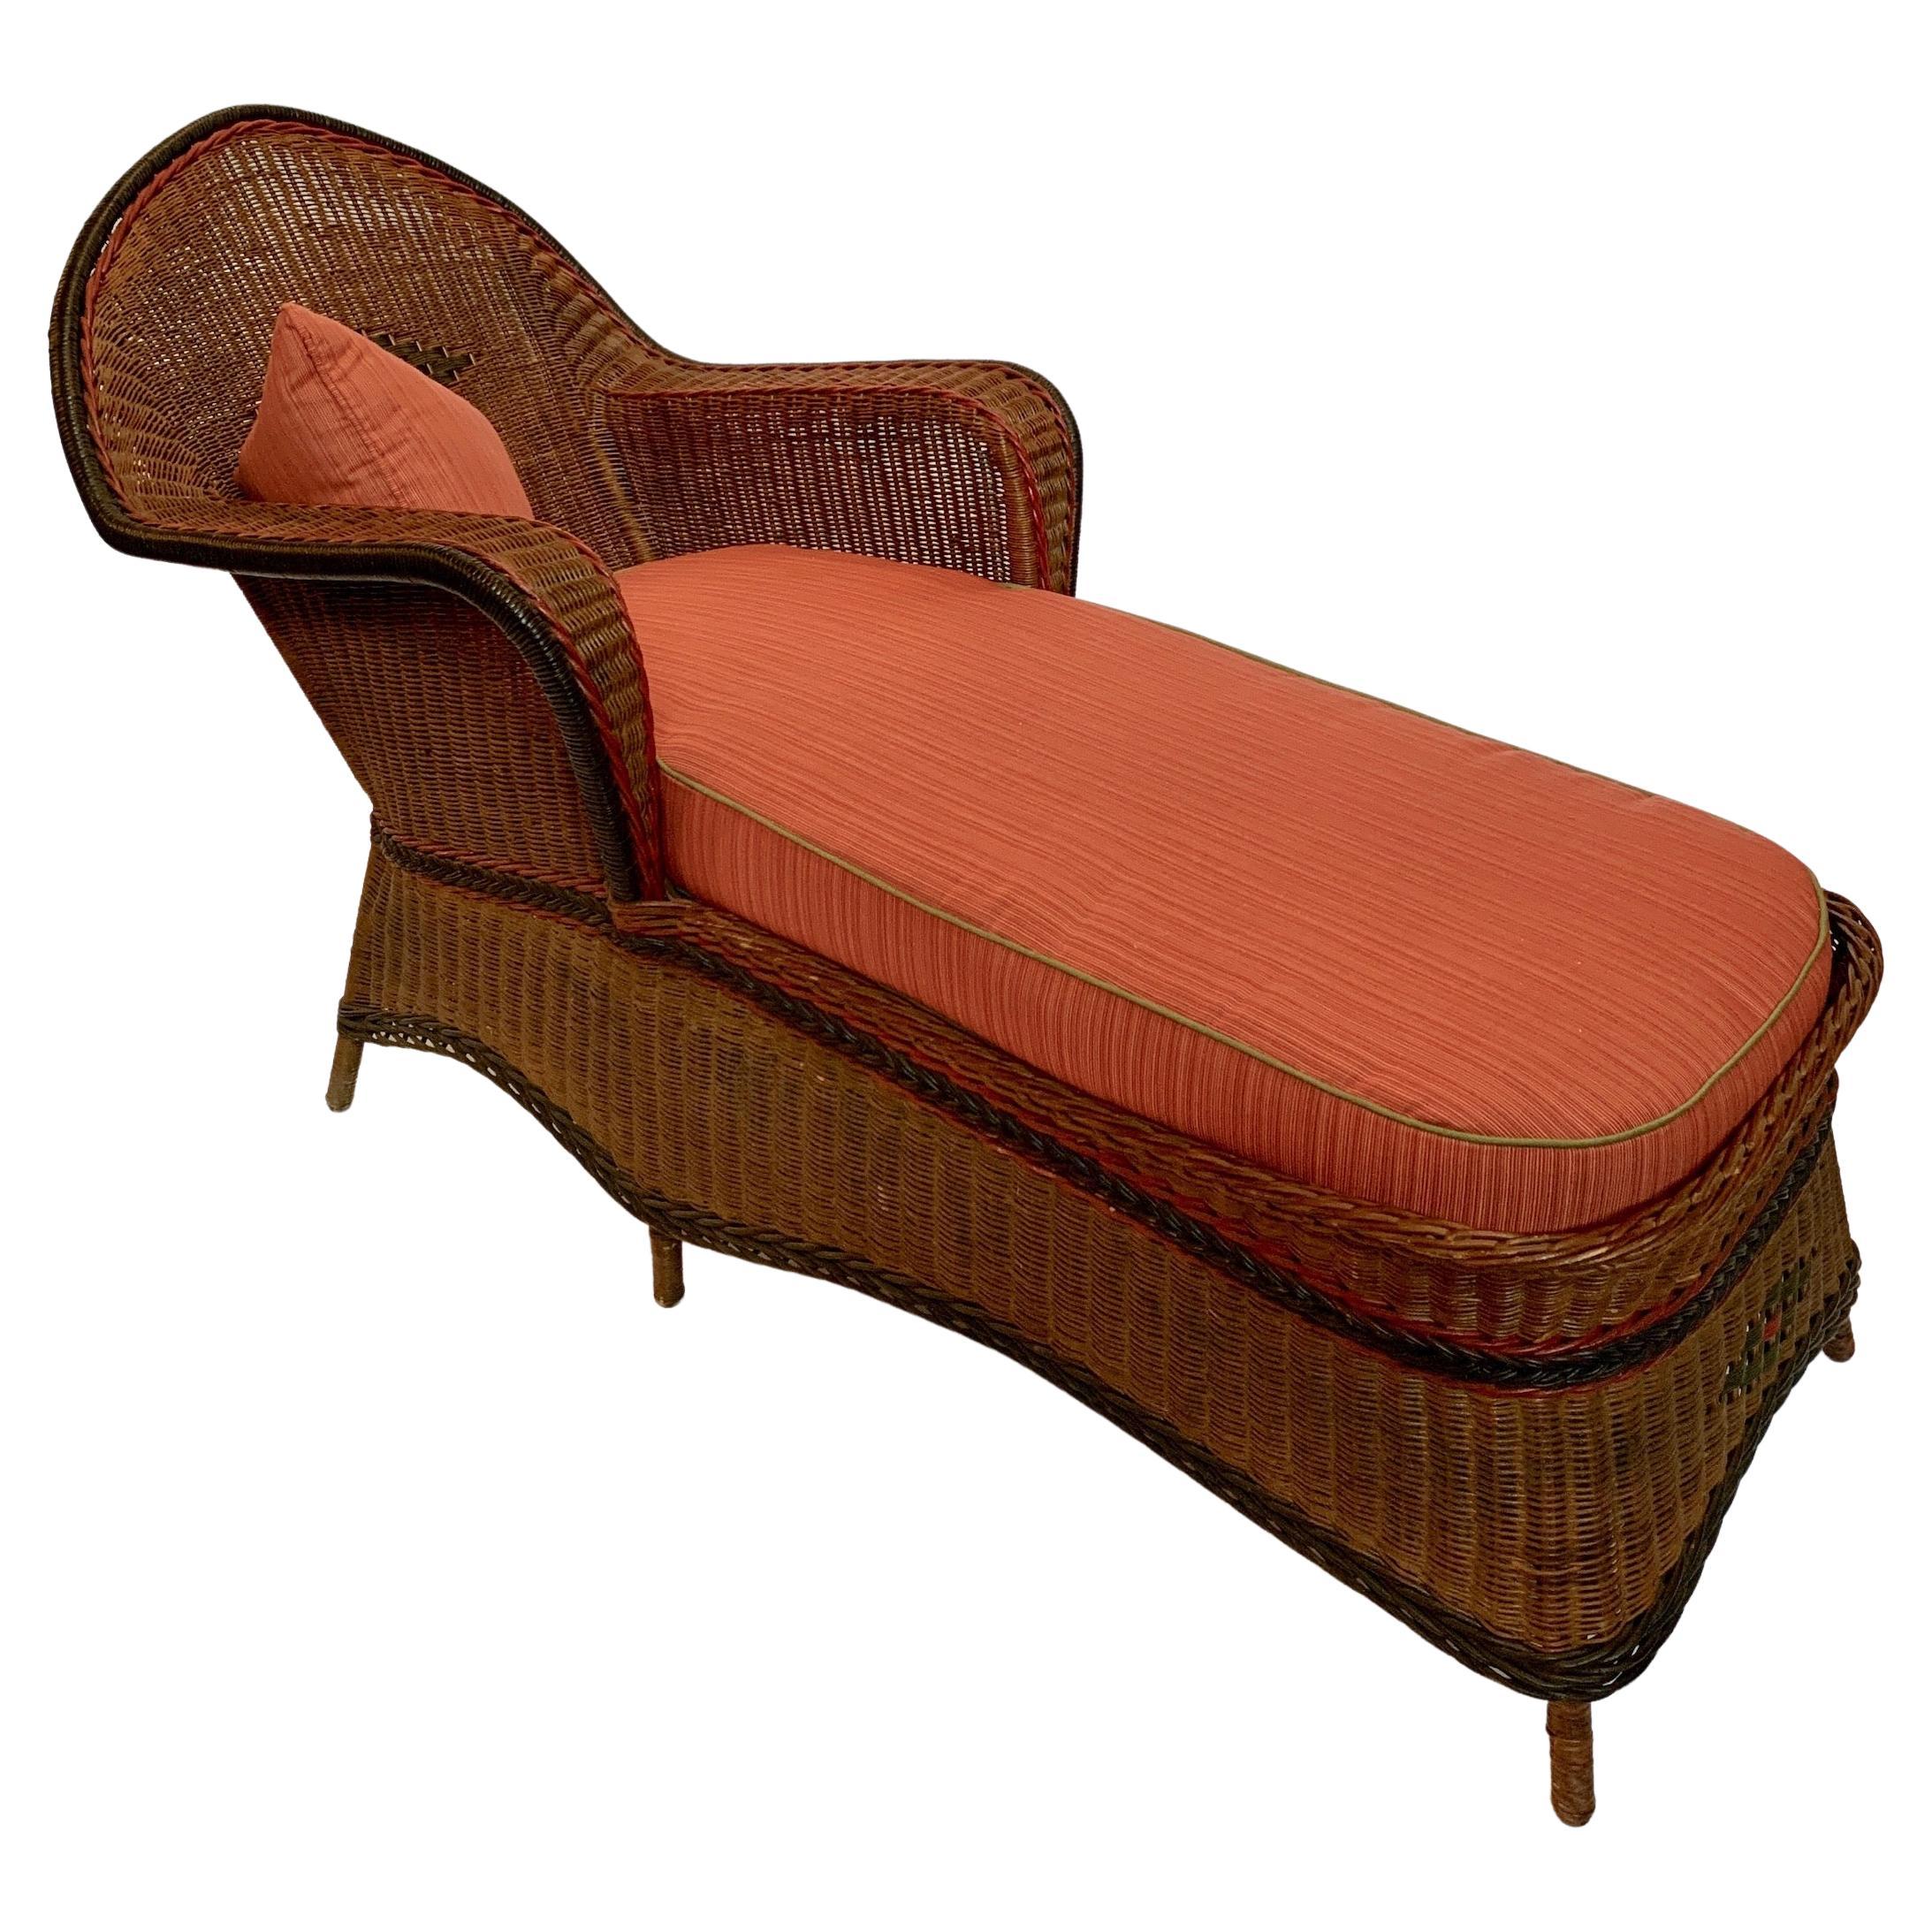 A grand sized close woven reed chaise lounge by the Heywood Wakefield Company of Gardner, Ma. C. 1920
This chaise is beautifully woven in a handsome natural finished reed and accented by woven paint decorated reeds in red, black and green.
The